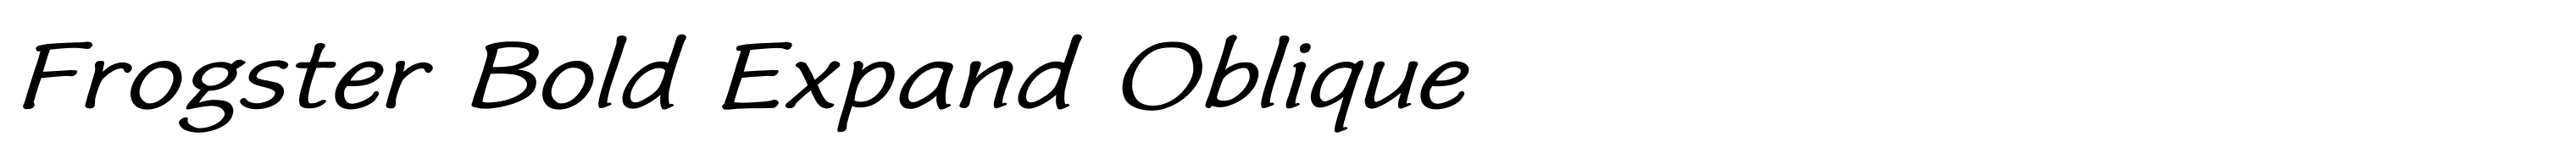 Frogster Bold Expand Oblique